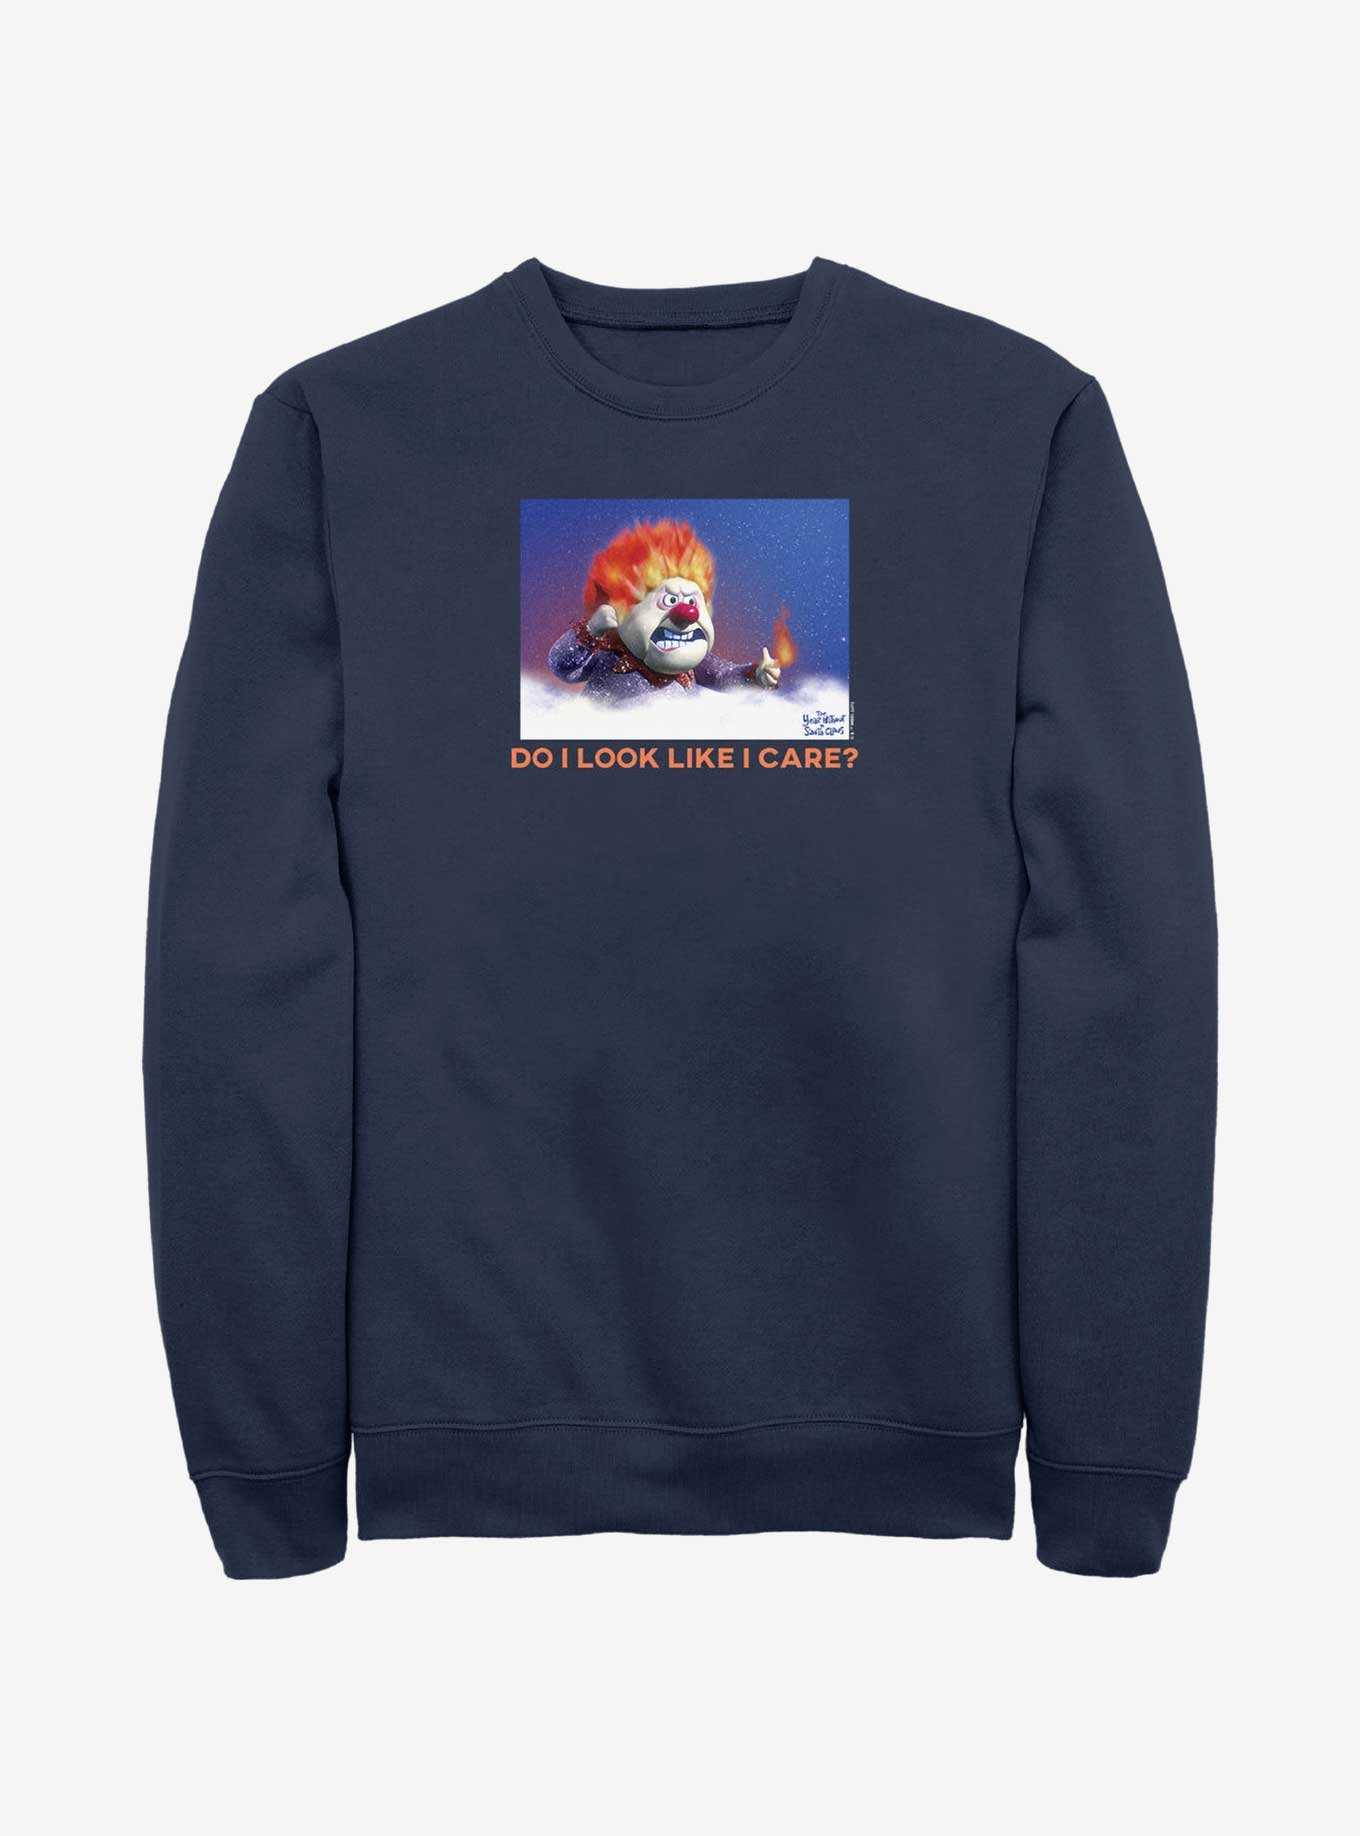 The Year Without a Santa Claus Heat Miser Do I Look Like I Care Meme Sweatshirt, , hi-res